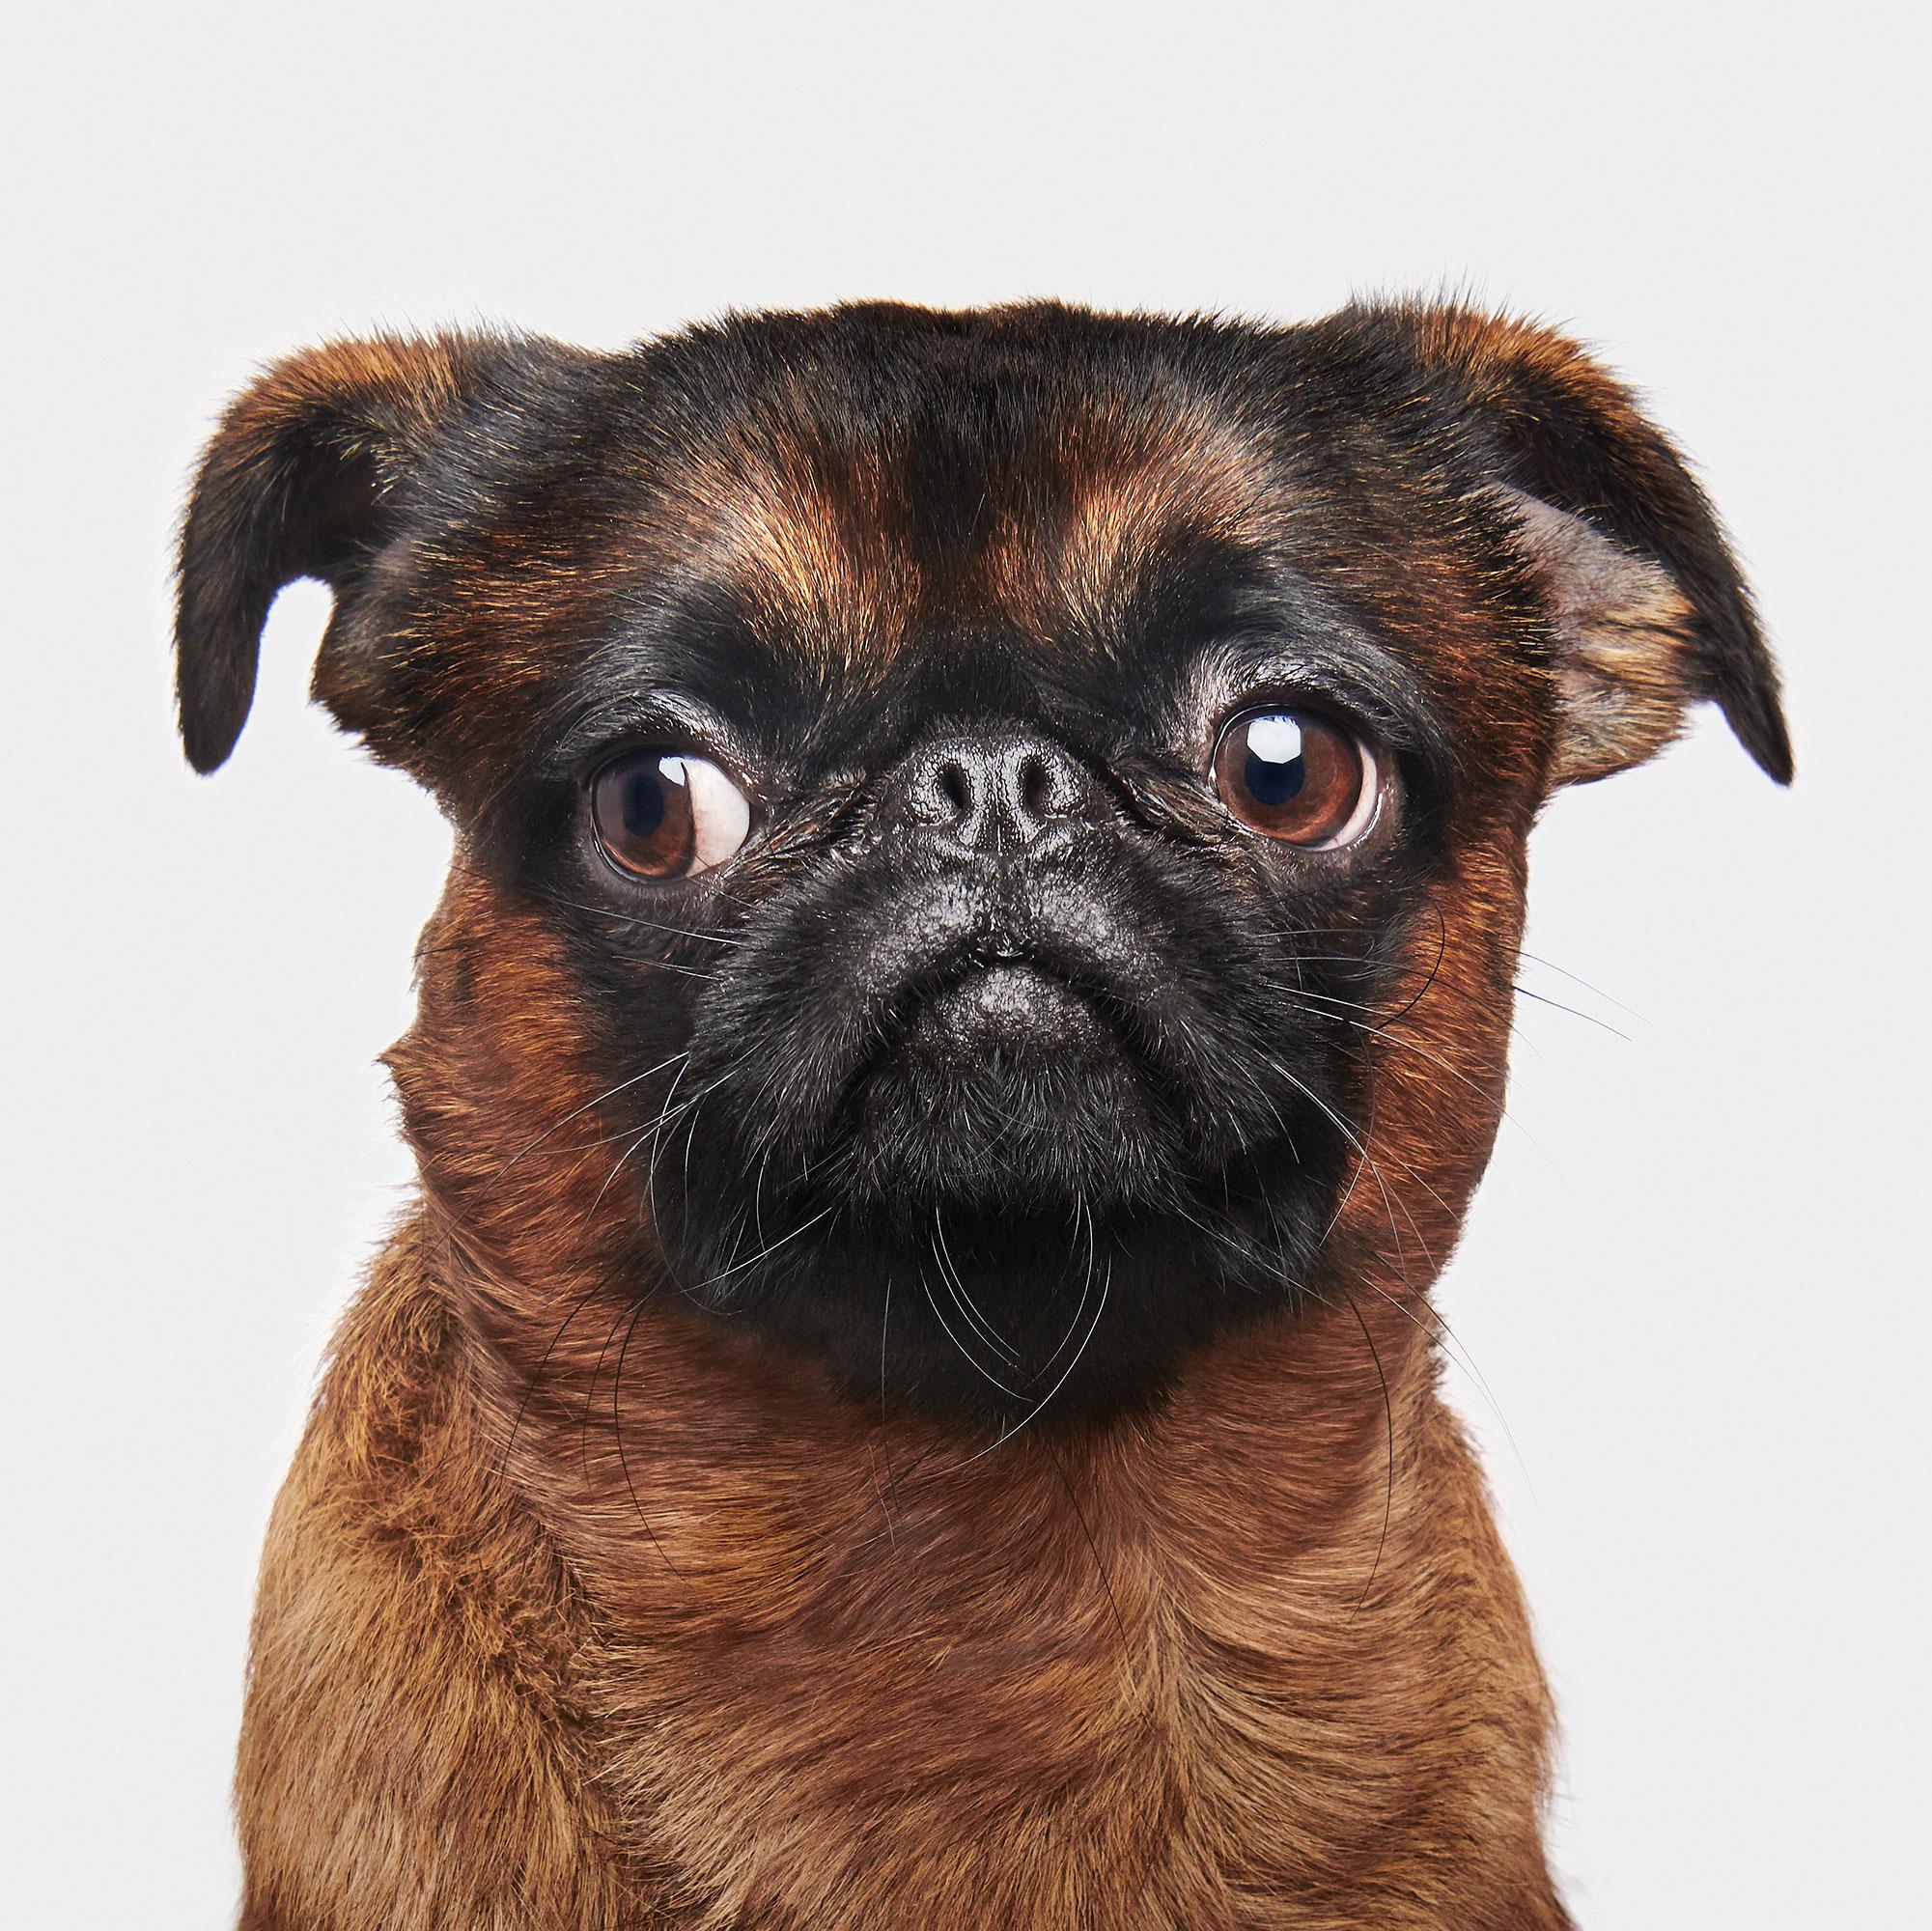 All available sizes and editions:
32 x 32, edition of 15
40 x 40, edition of 10
48 x 48, edition of 5

Narrative:
That look when someone mistakes you for a pug … again. Brussels Griffons may look pug-like, but the rarity of the breed and their